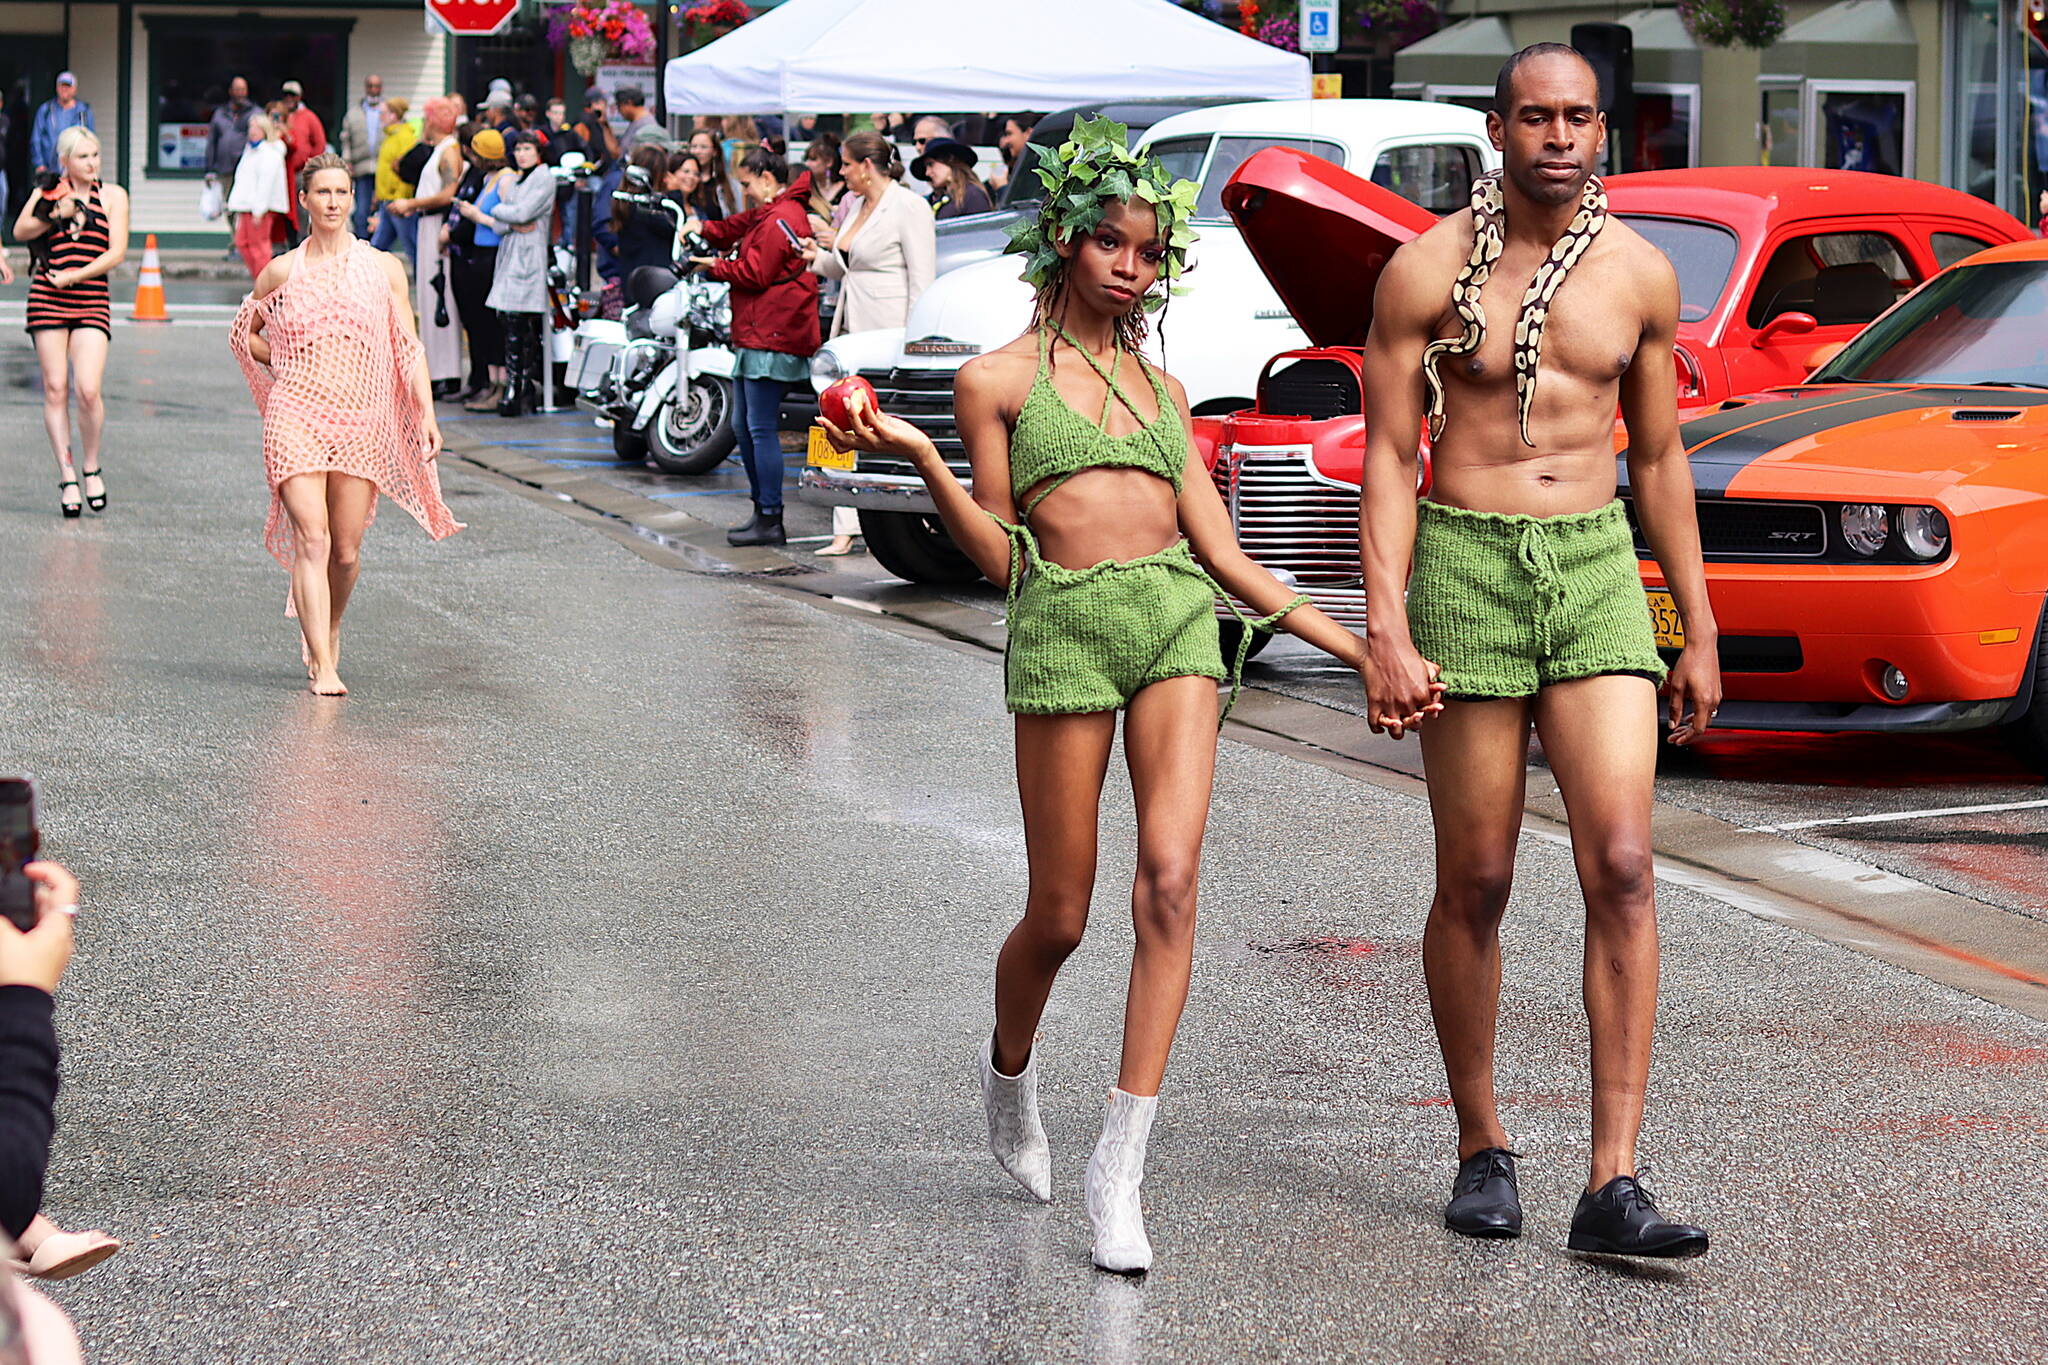 Chameleon Cooper-Lykes, left, and Demetrius Lykes, a Los Angeles couple, exhibit “Adam and Eve” outfits during Alaska Fashion Week’s outdoor runway show in downtown Juneau on Saturday. (Mark Sabbatini / Juneau Empire)